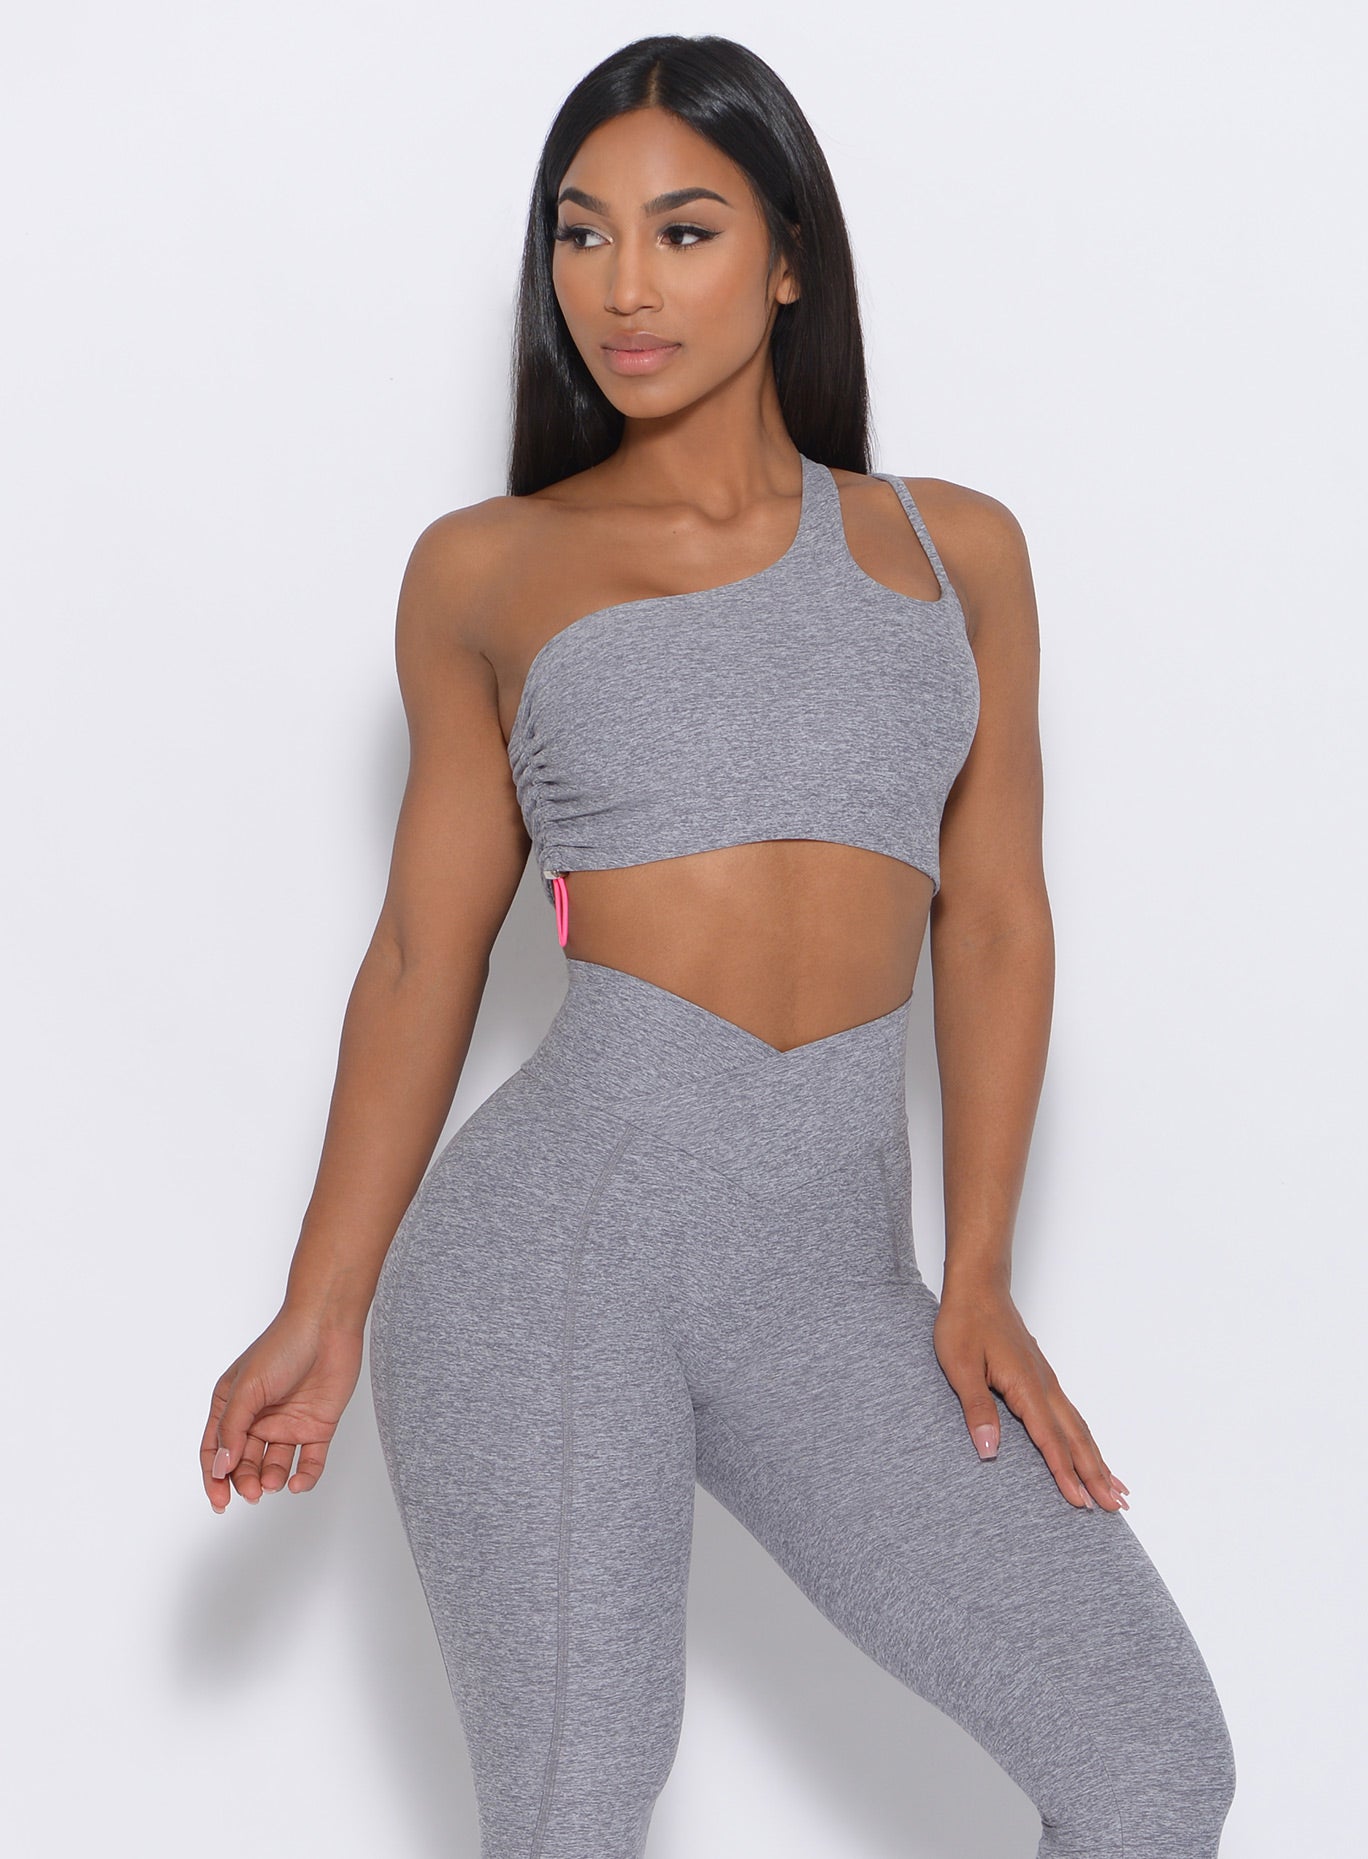 Front profile of the model with her left hand on thigh wearing our asymmetrical scrunch bra in cloud color and a matching leggings